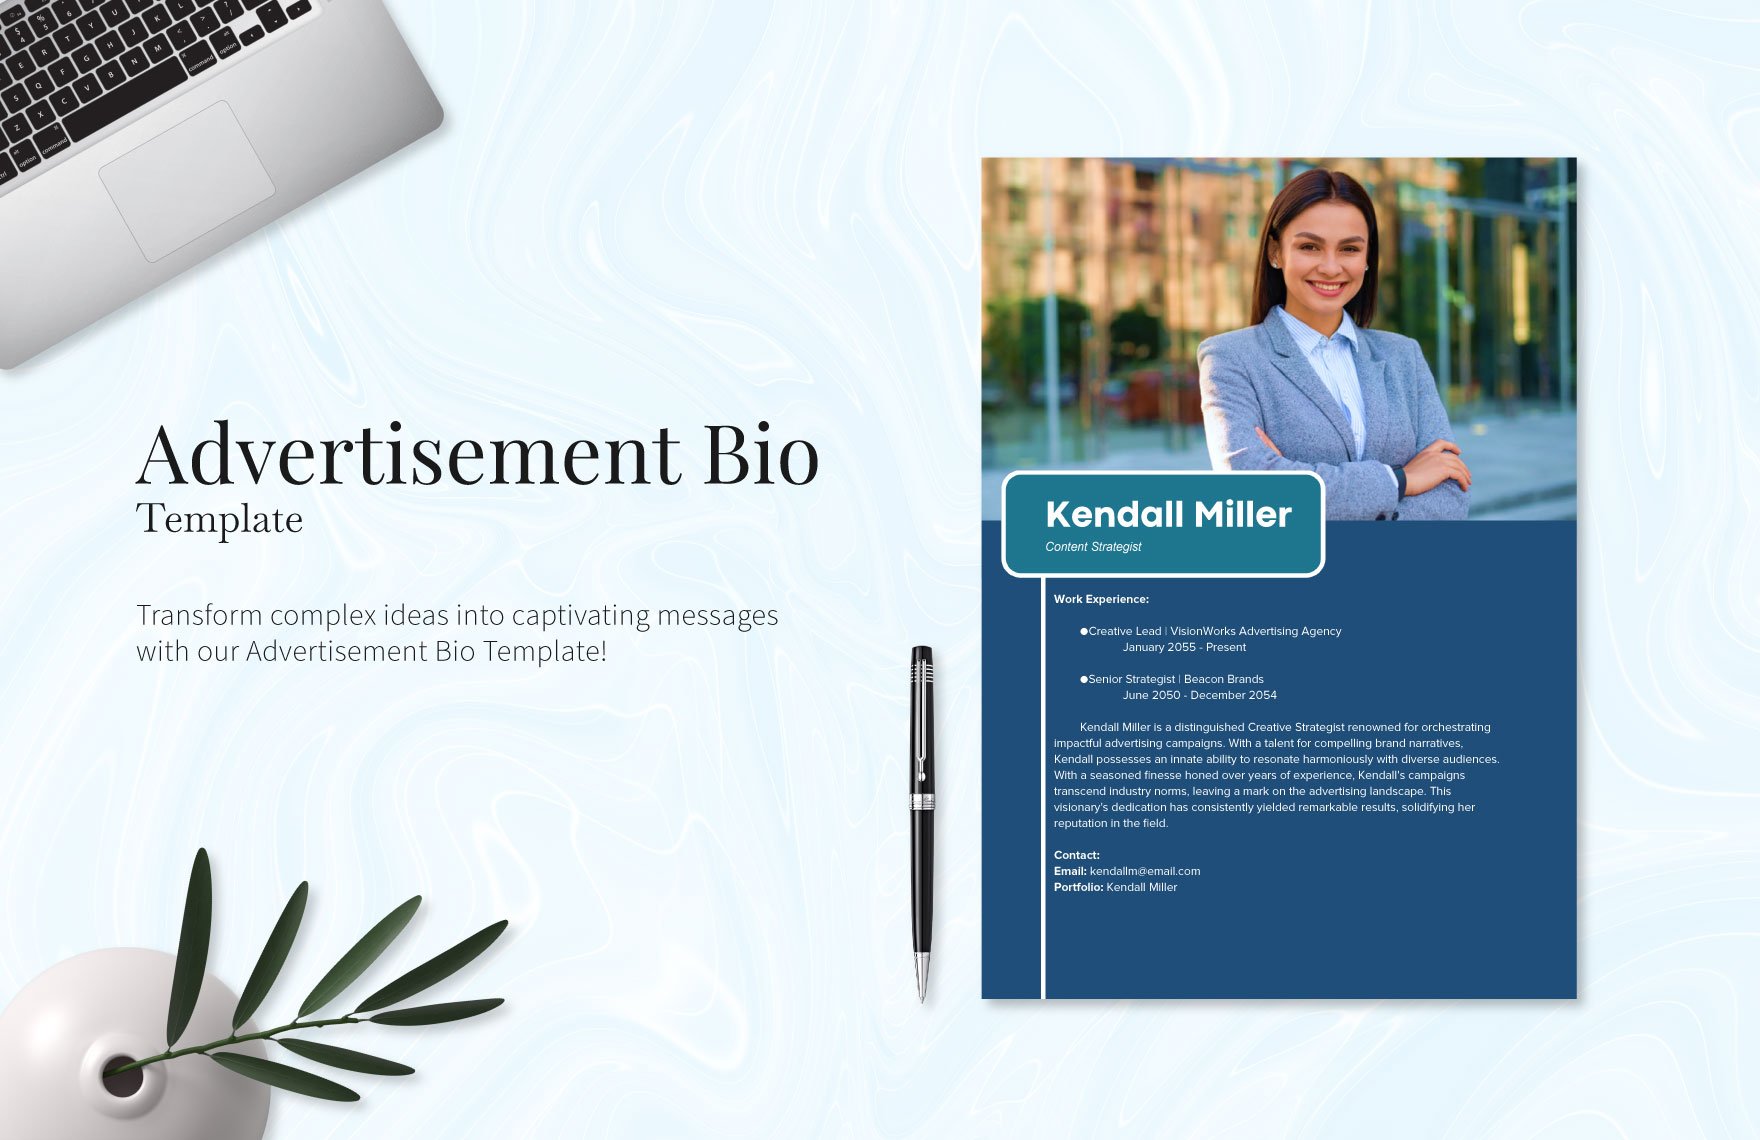 Advertisement Bio Template in Word, Illustrator, PSD, PNG